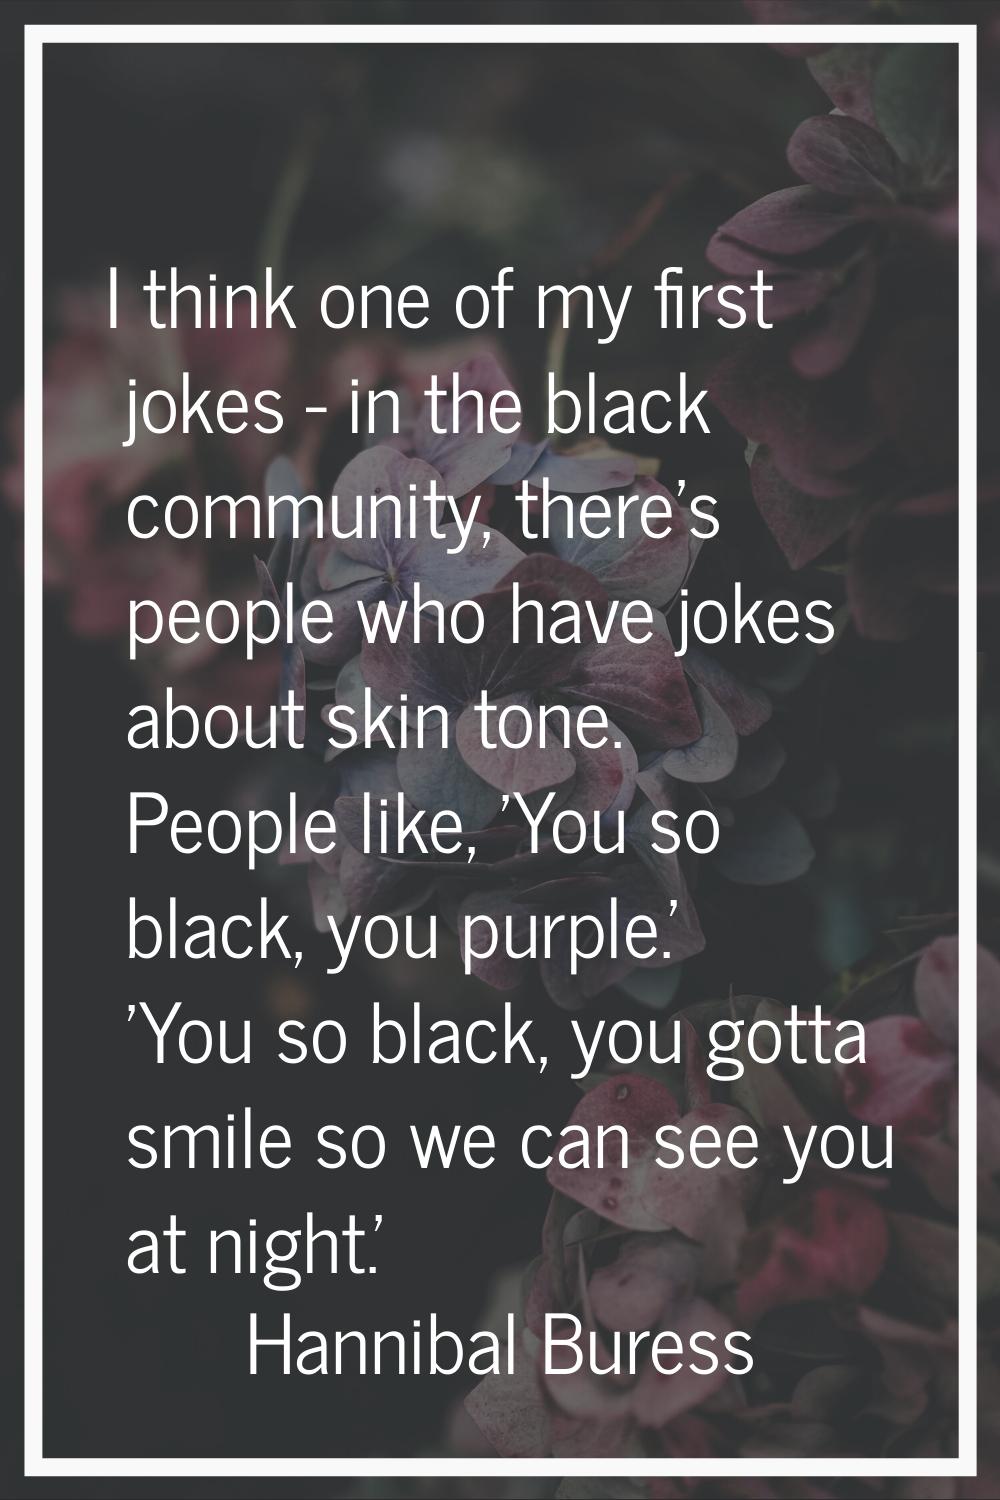 I think one of my first jokes - in the black community, there's people who have jokes about skin to